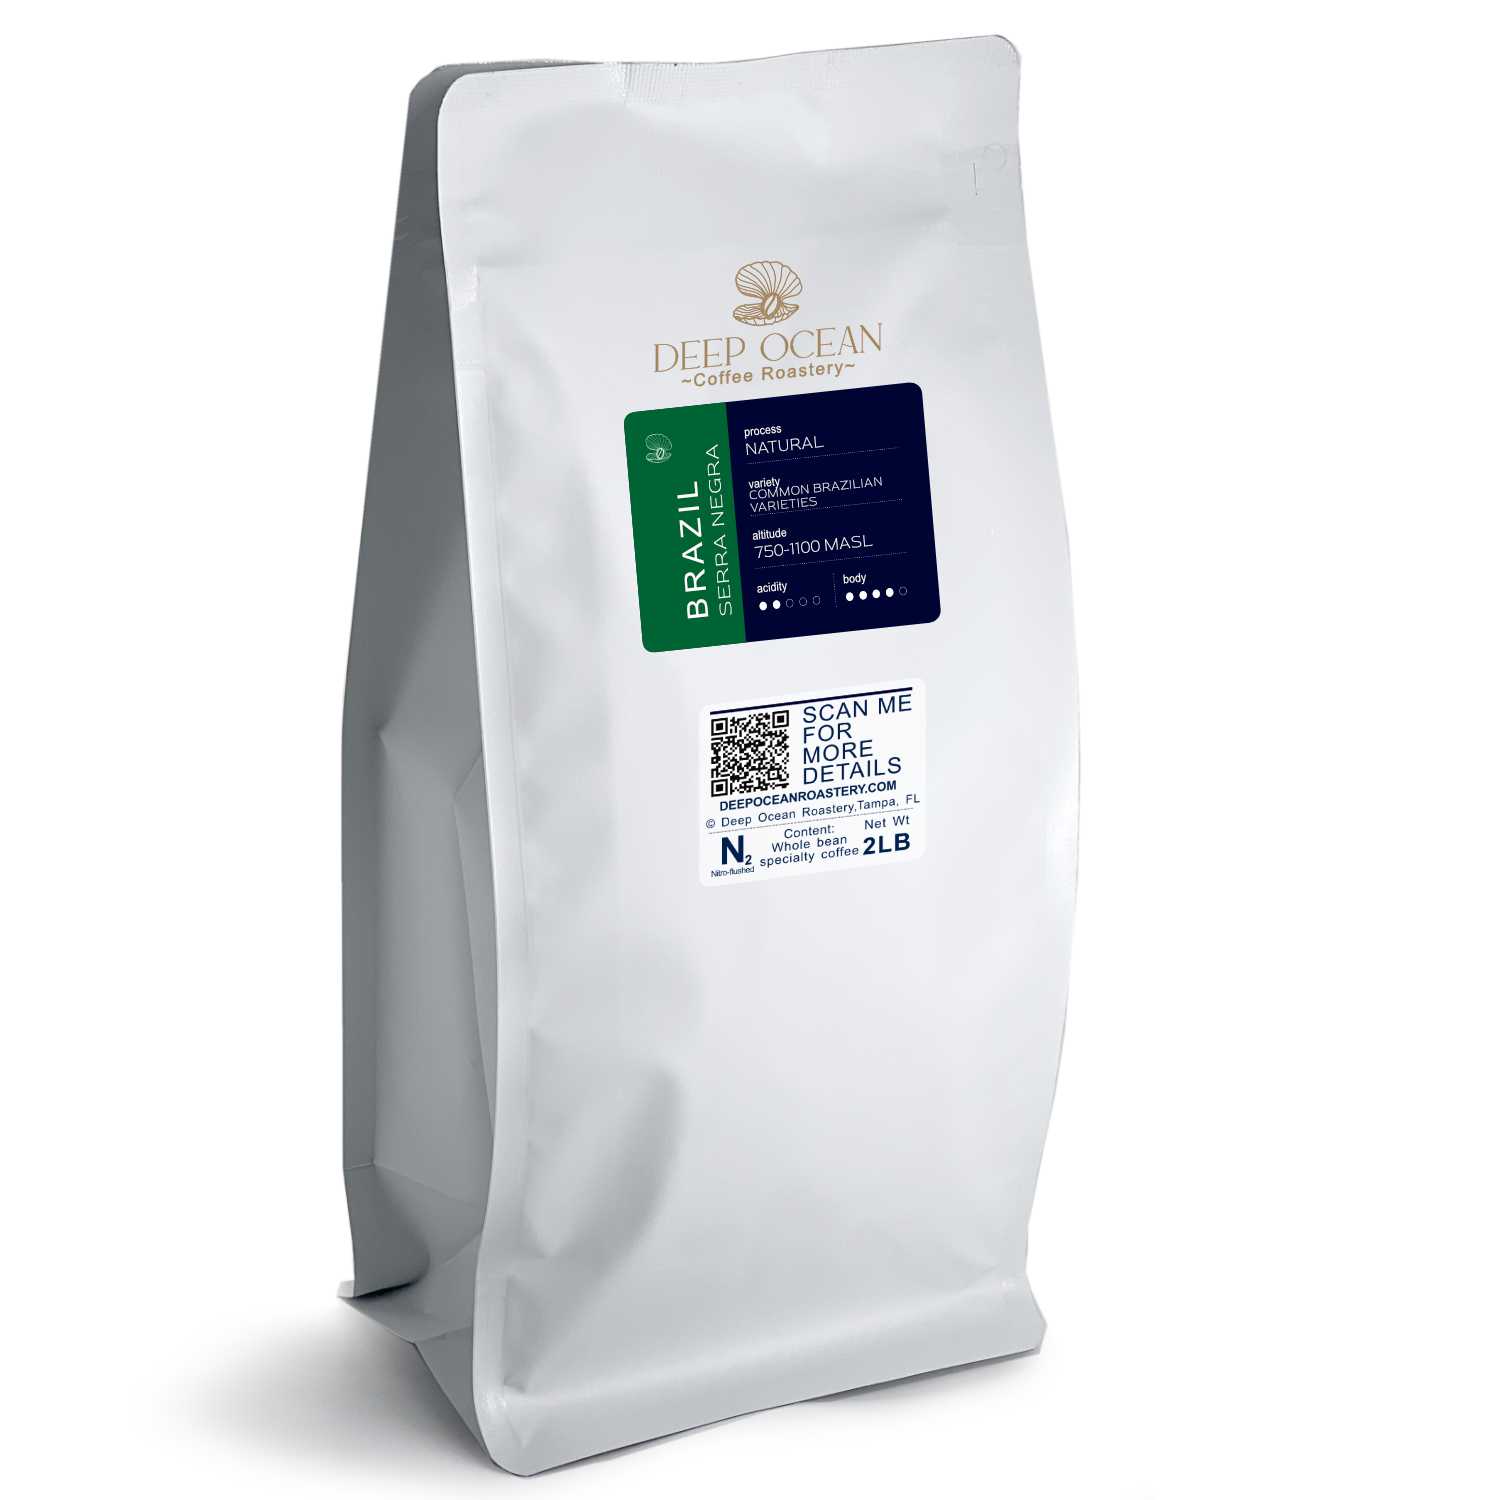 variant 1 - medium roasted coffee Barzil is great choice of specialty coffee.